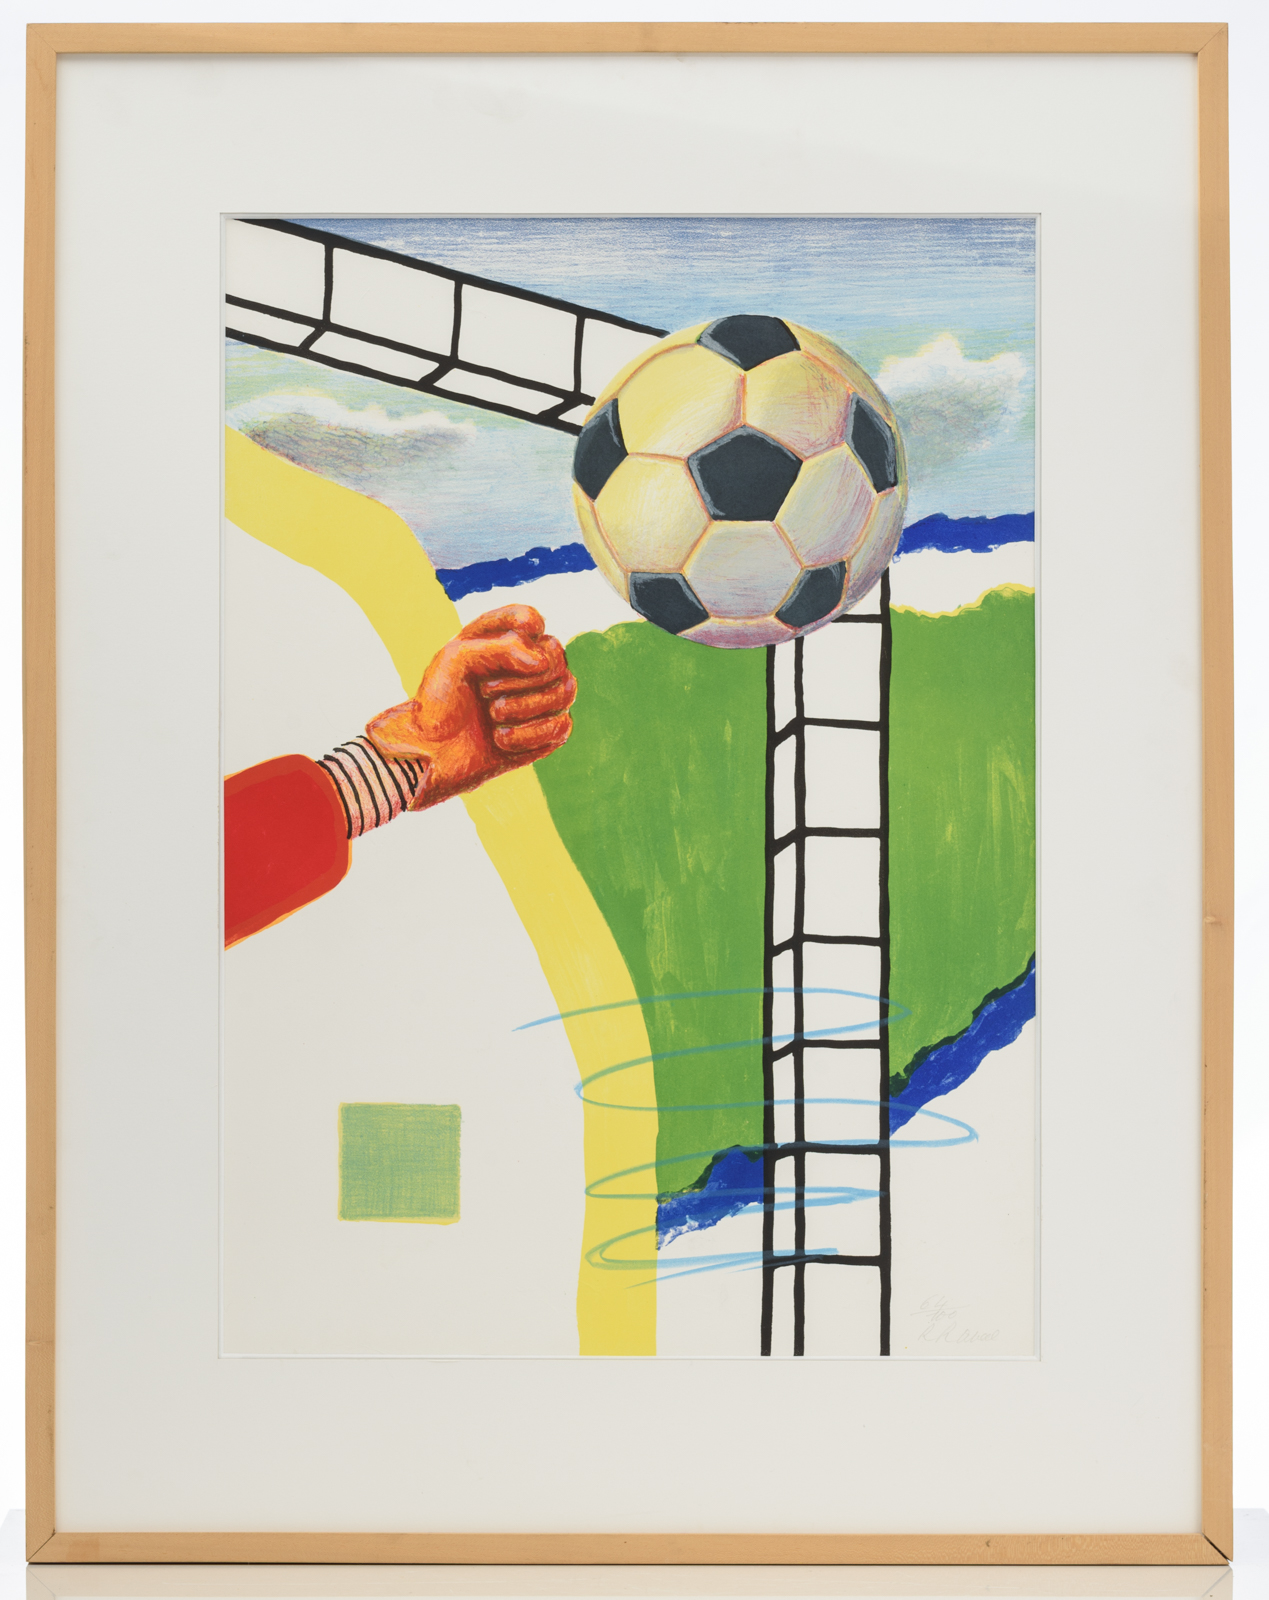 Raveel R., 'World Cup', lithograph, N° 64/100, 56,5 x 78,5 cm Is possibly subject of the SABAM legis - Image 2 of 4